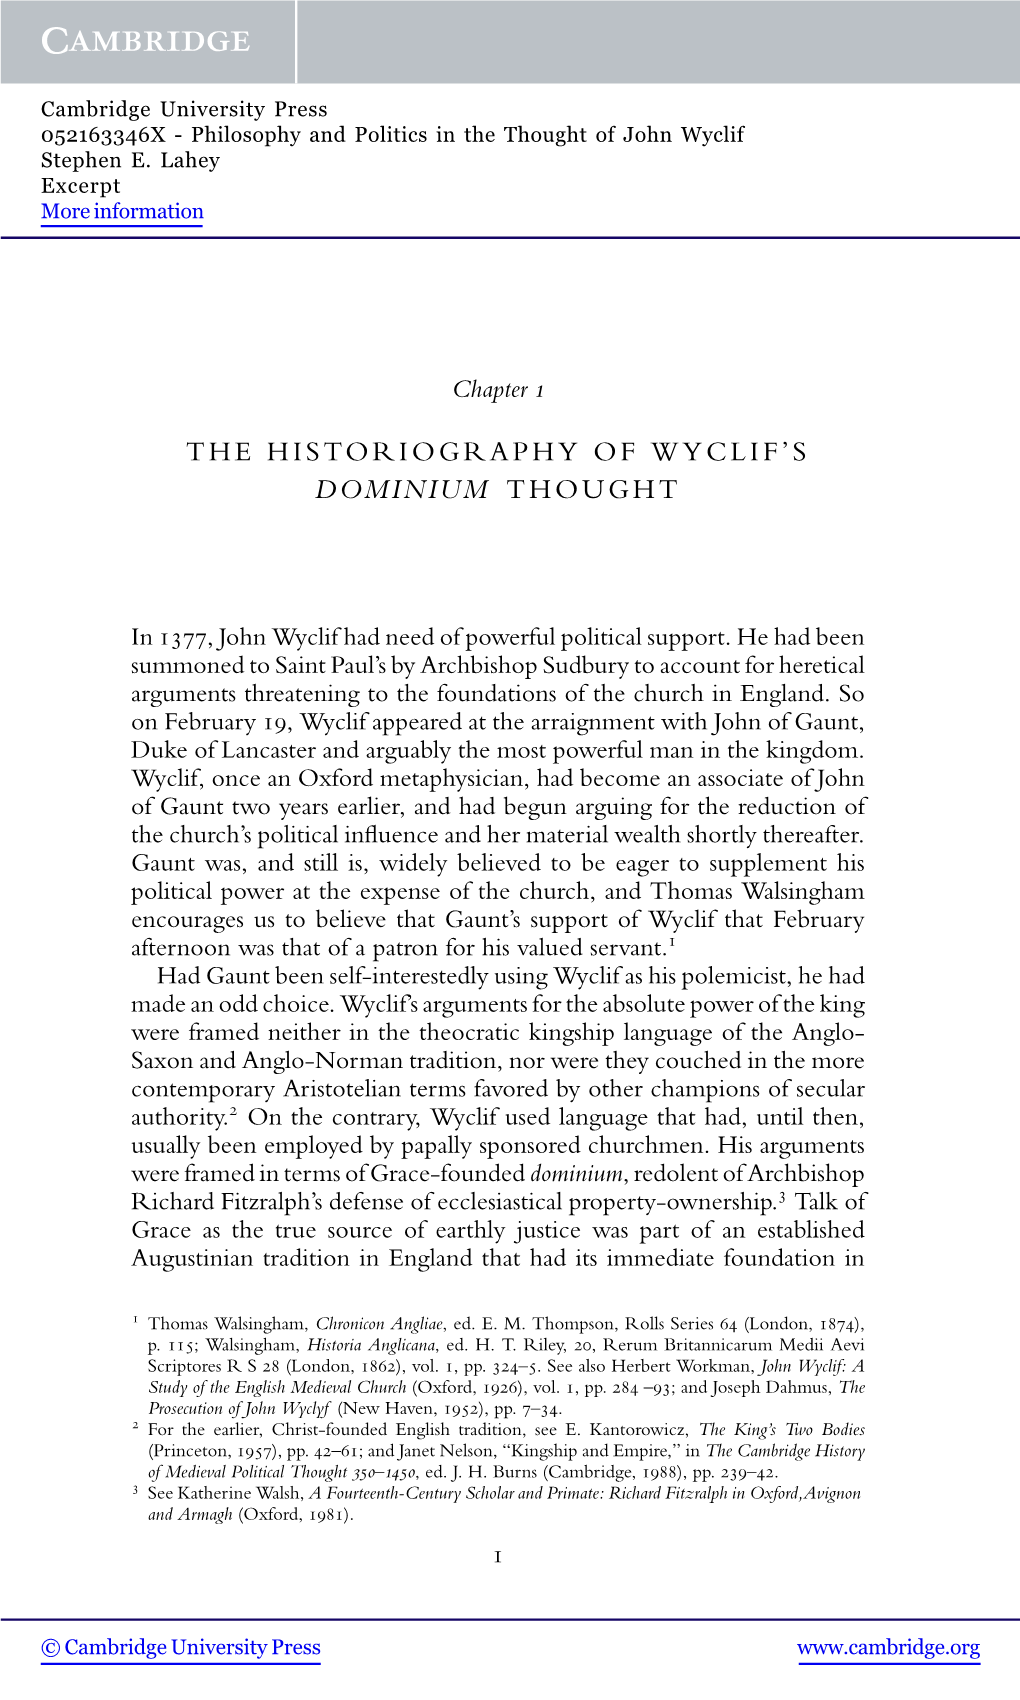 The Historiography of Wyclif's Dominium Thought